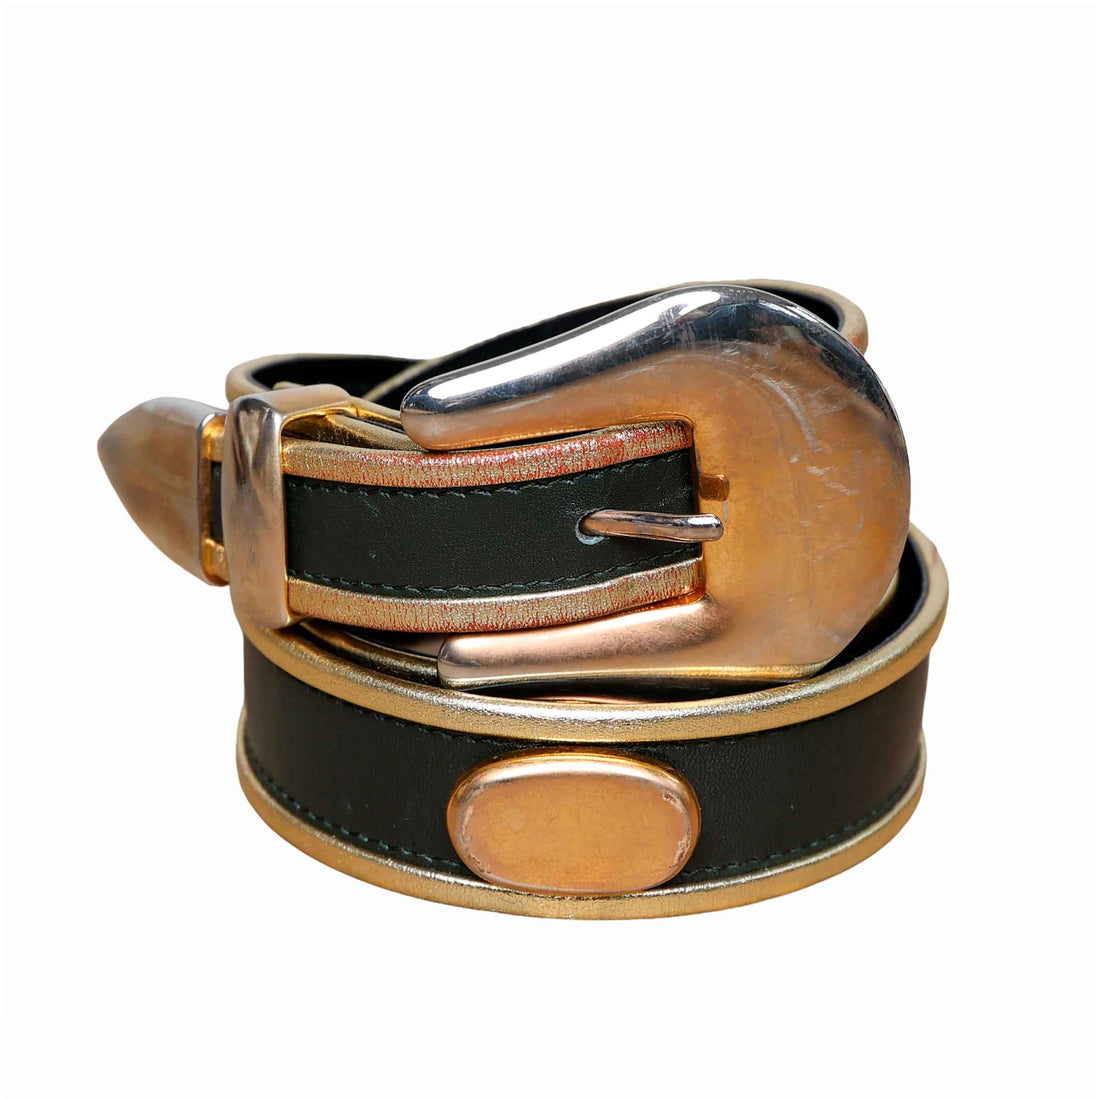 Escada vintage leather belt with gold fittings